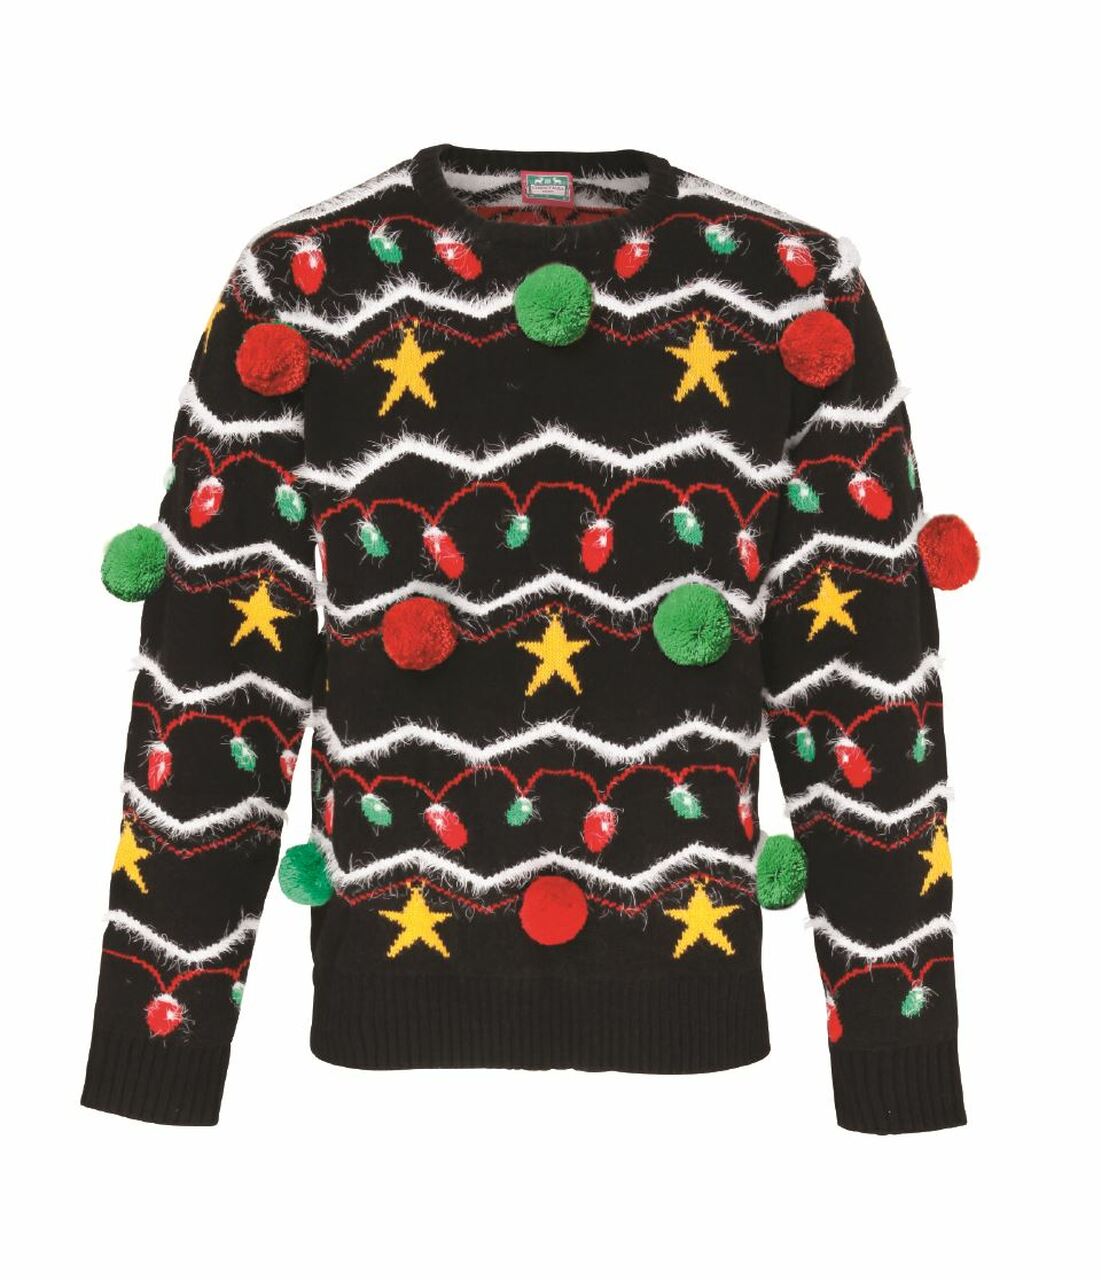 ASVP Shop Adults' Unisex Christmas Jumper with Christmas Lights Design and Pom Pom Baubles